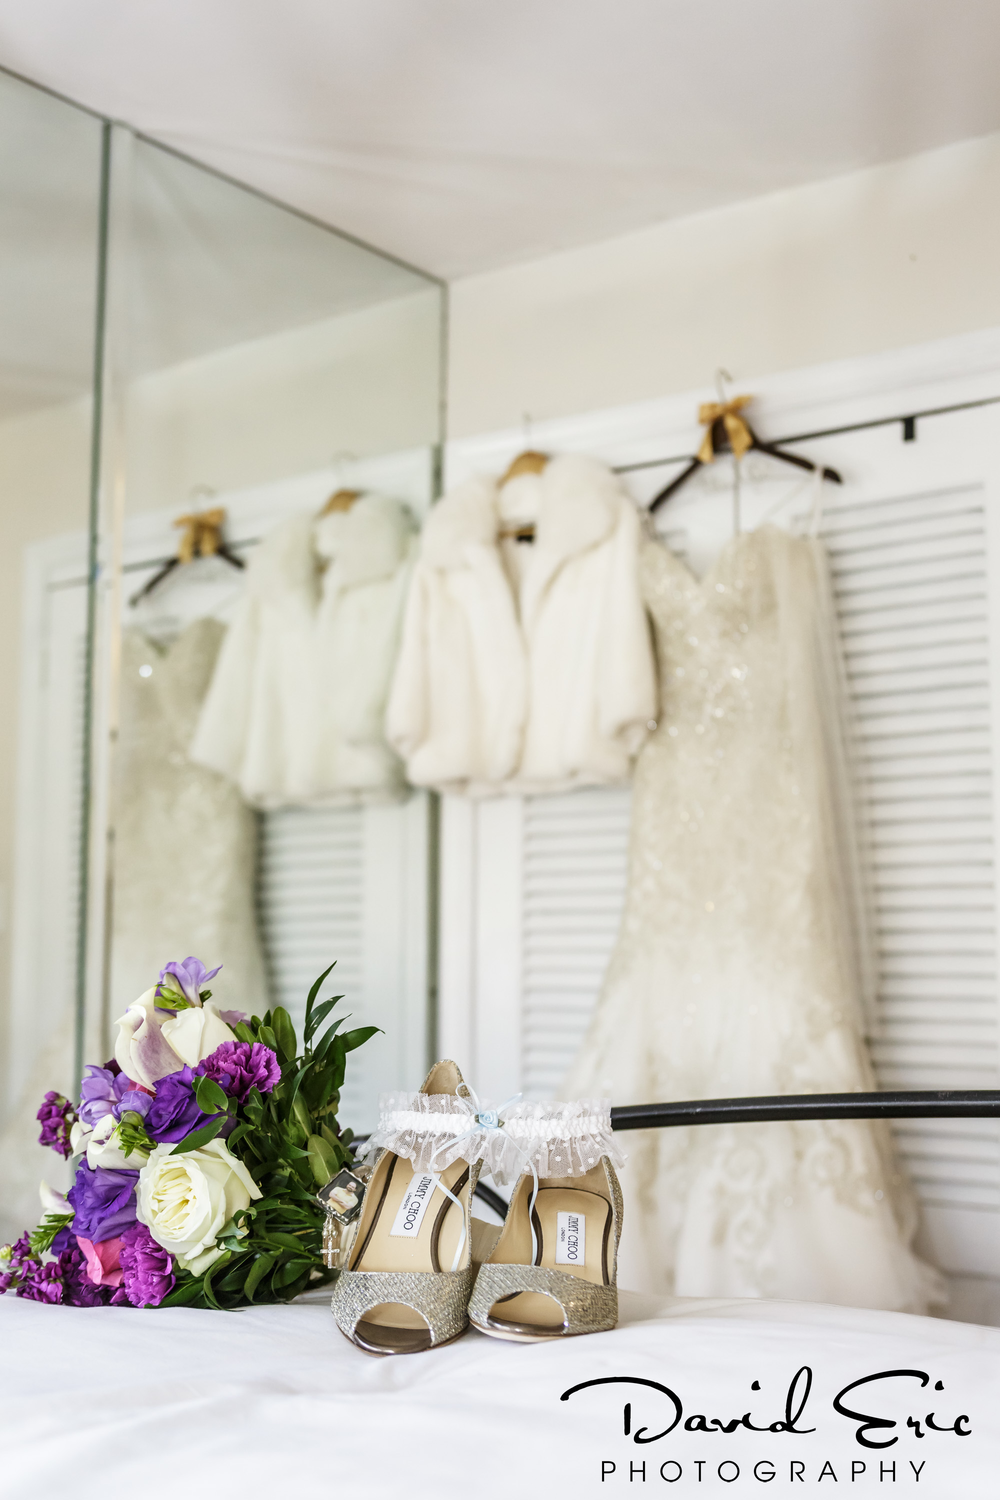 5 Steps to Staying Organized on Your Big Day